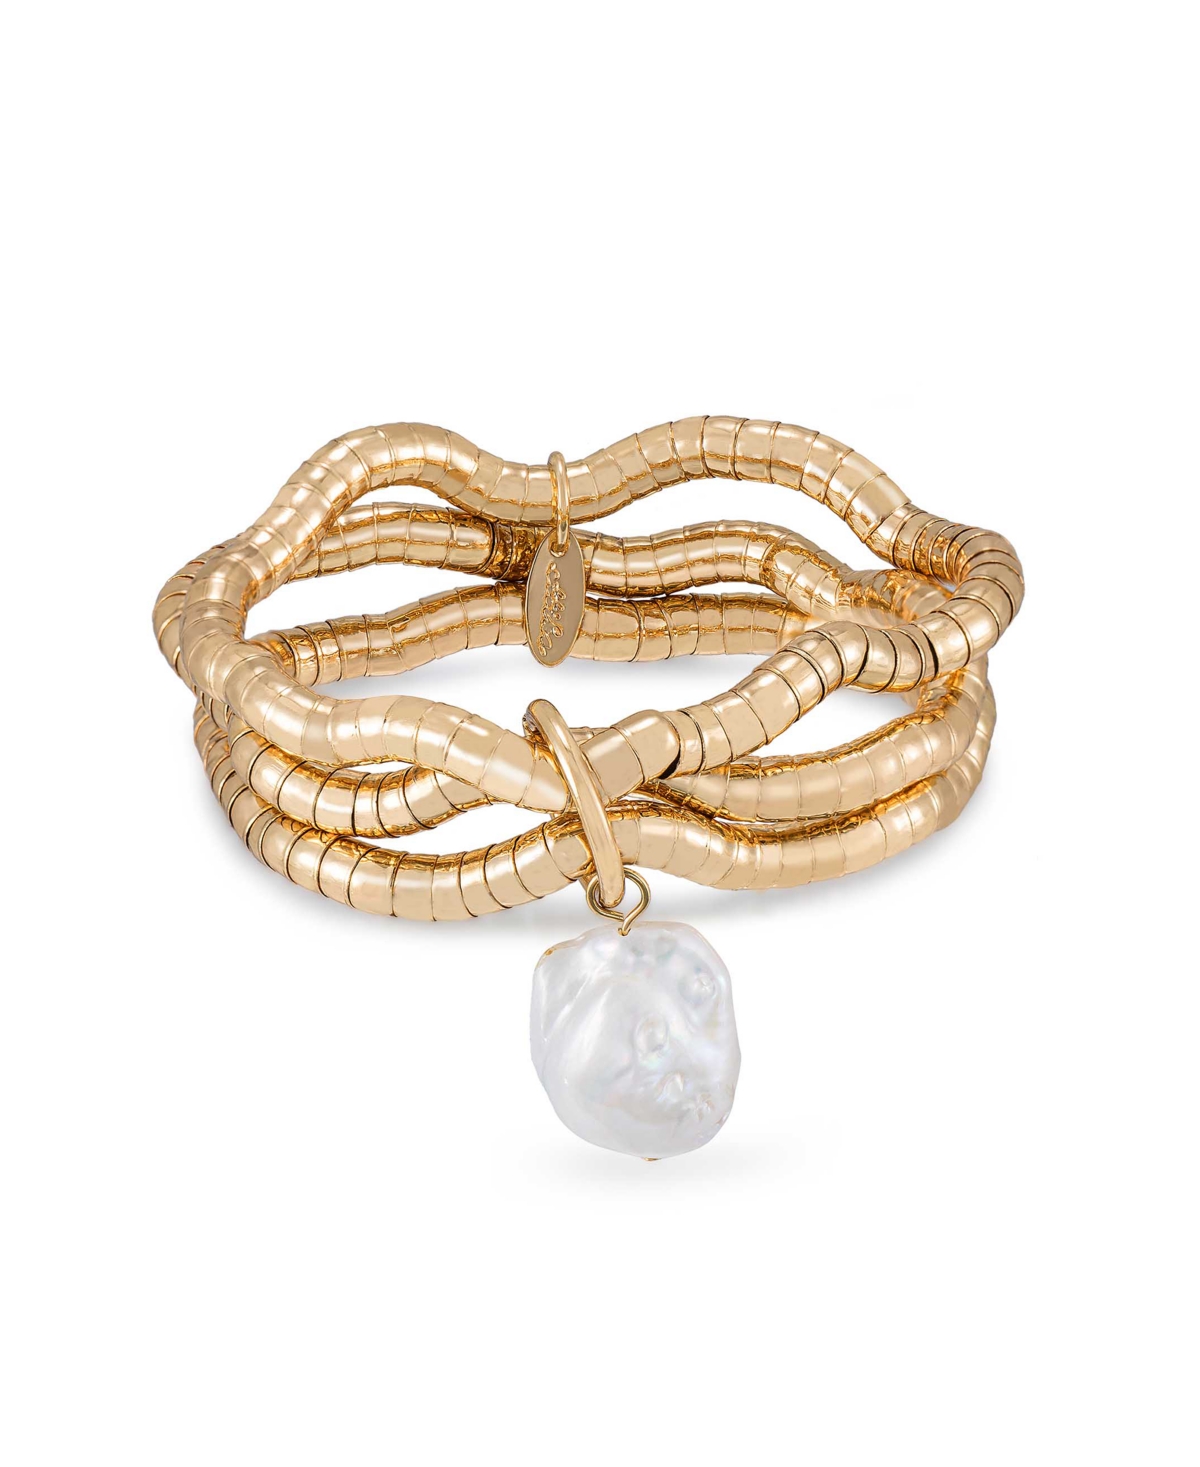 Liquid Gold-Plated and Cultured Freshwater Pearl Multi Layered 18K Gold-Plated Bracelet - Gold